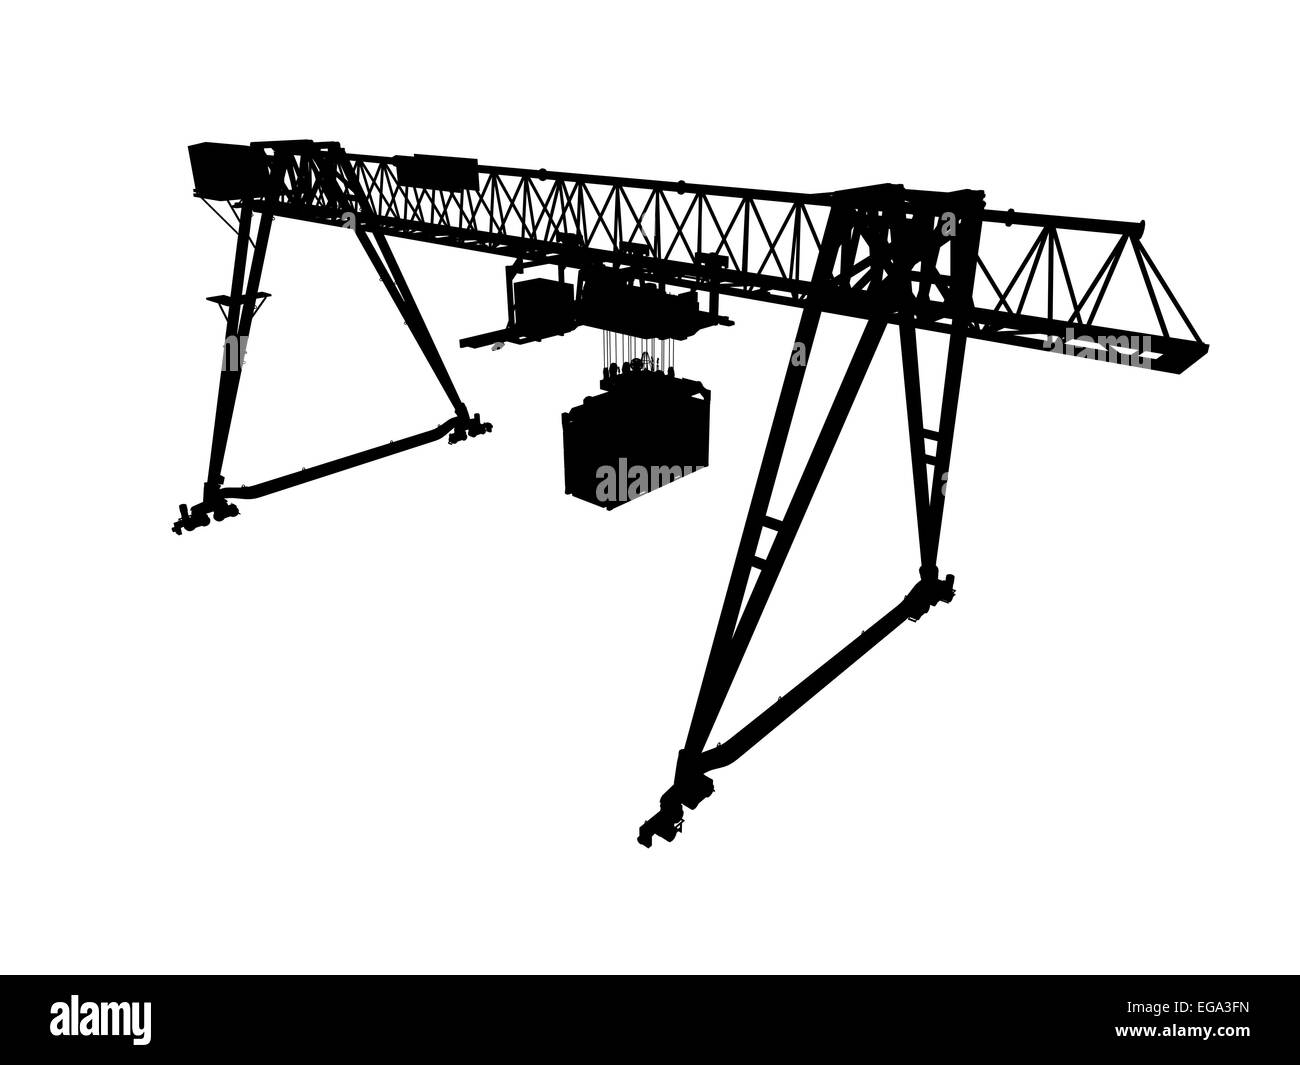 Container bridge gantry crane. Black silhouette isolated on white background. Render of 3d model, wide angle perspective view Stock Photo